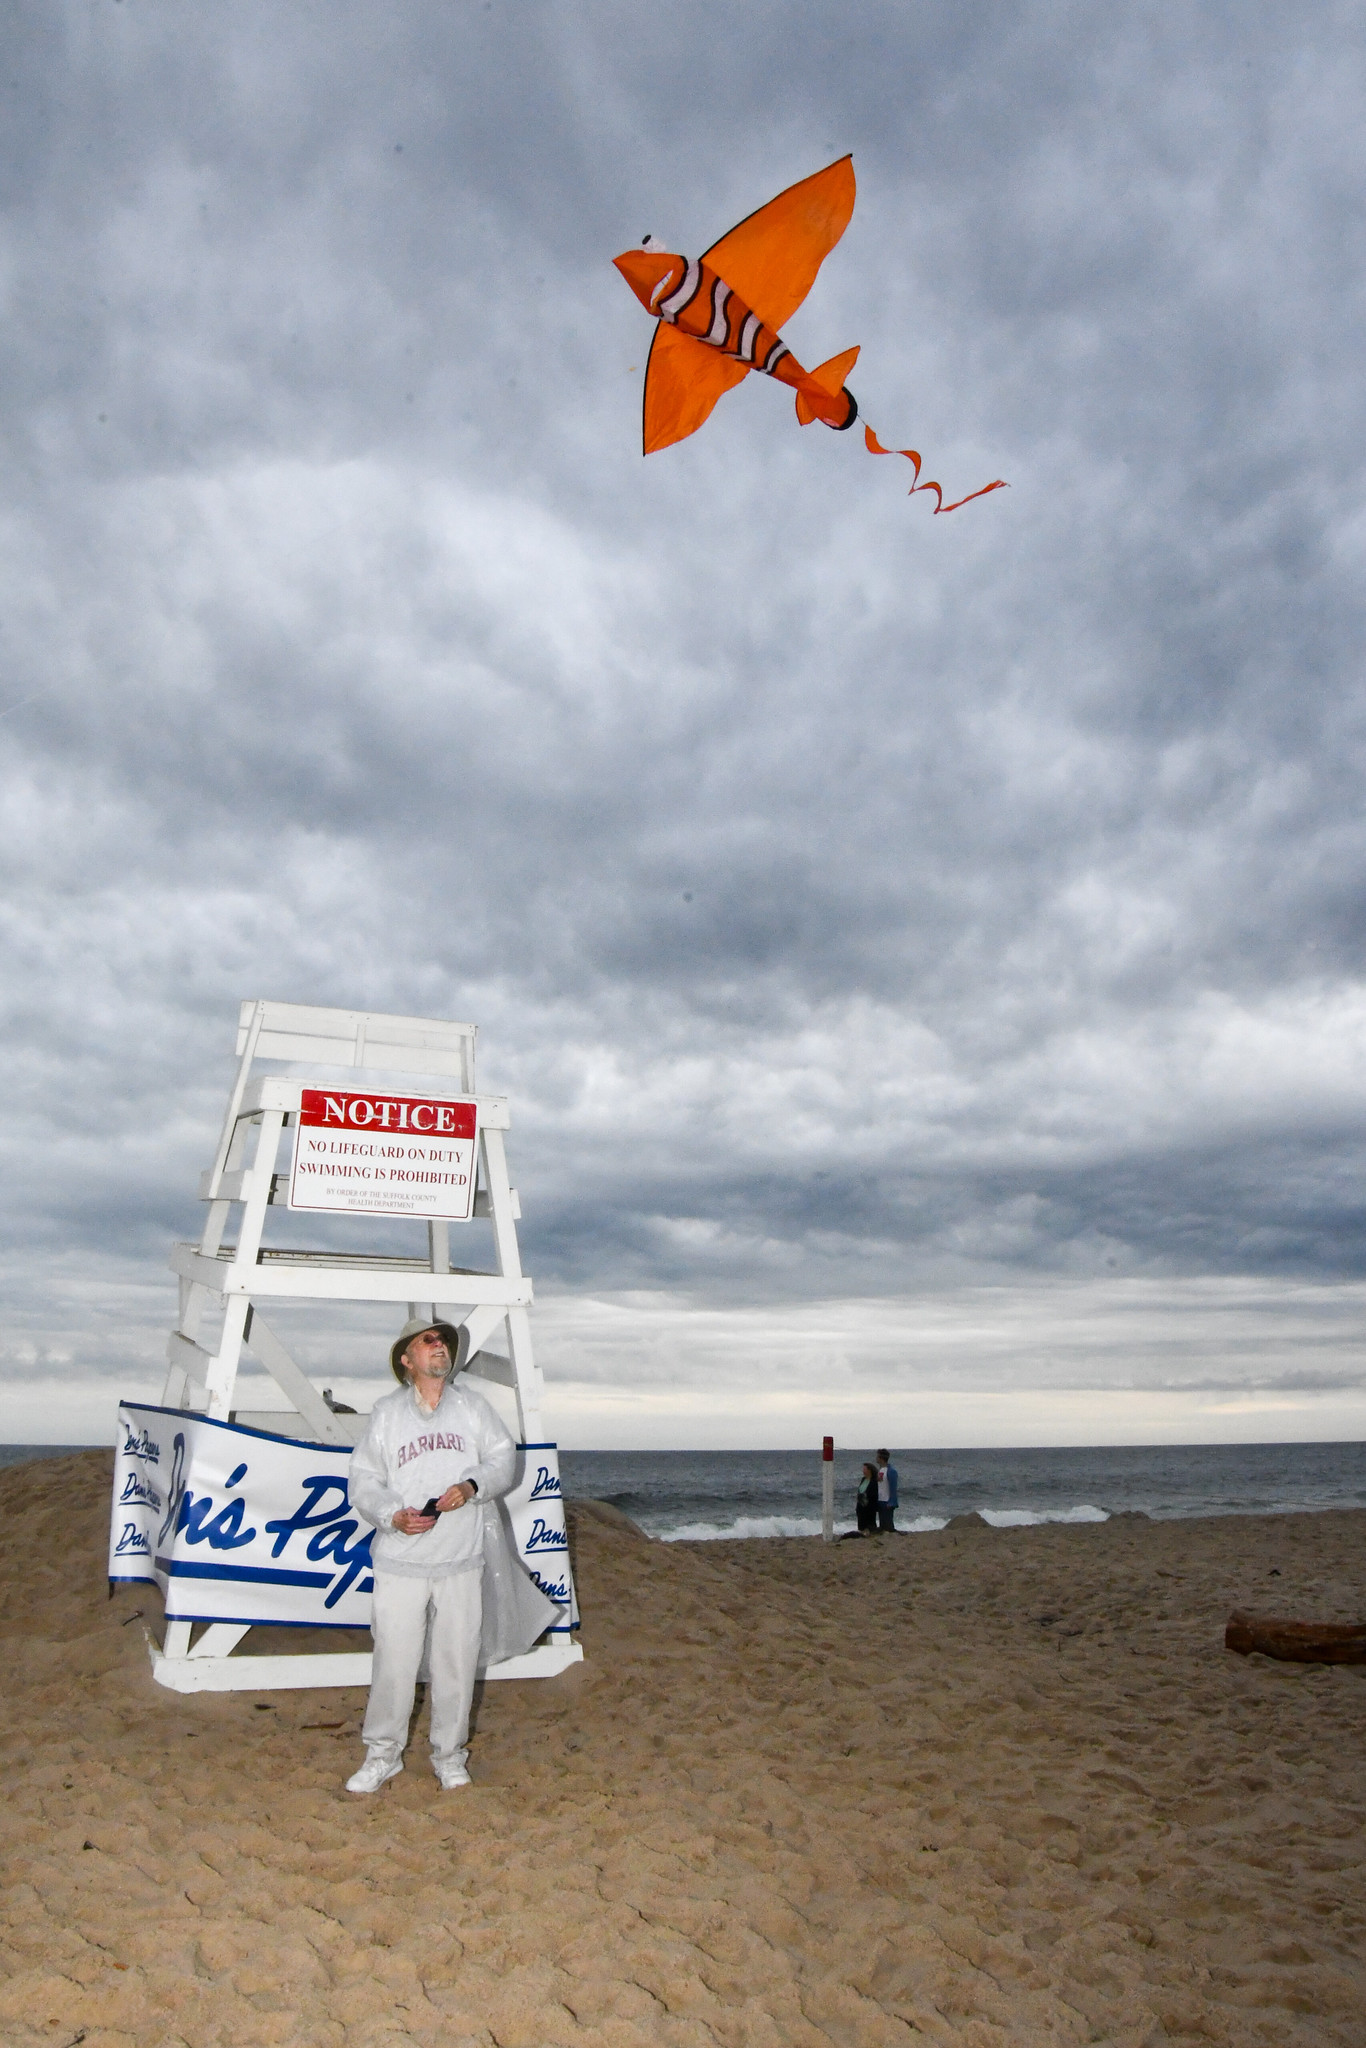 Dan Rattiner at the Sagg Beach Kite Flying Contest with stormy skies but no rain.